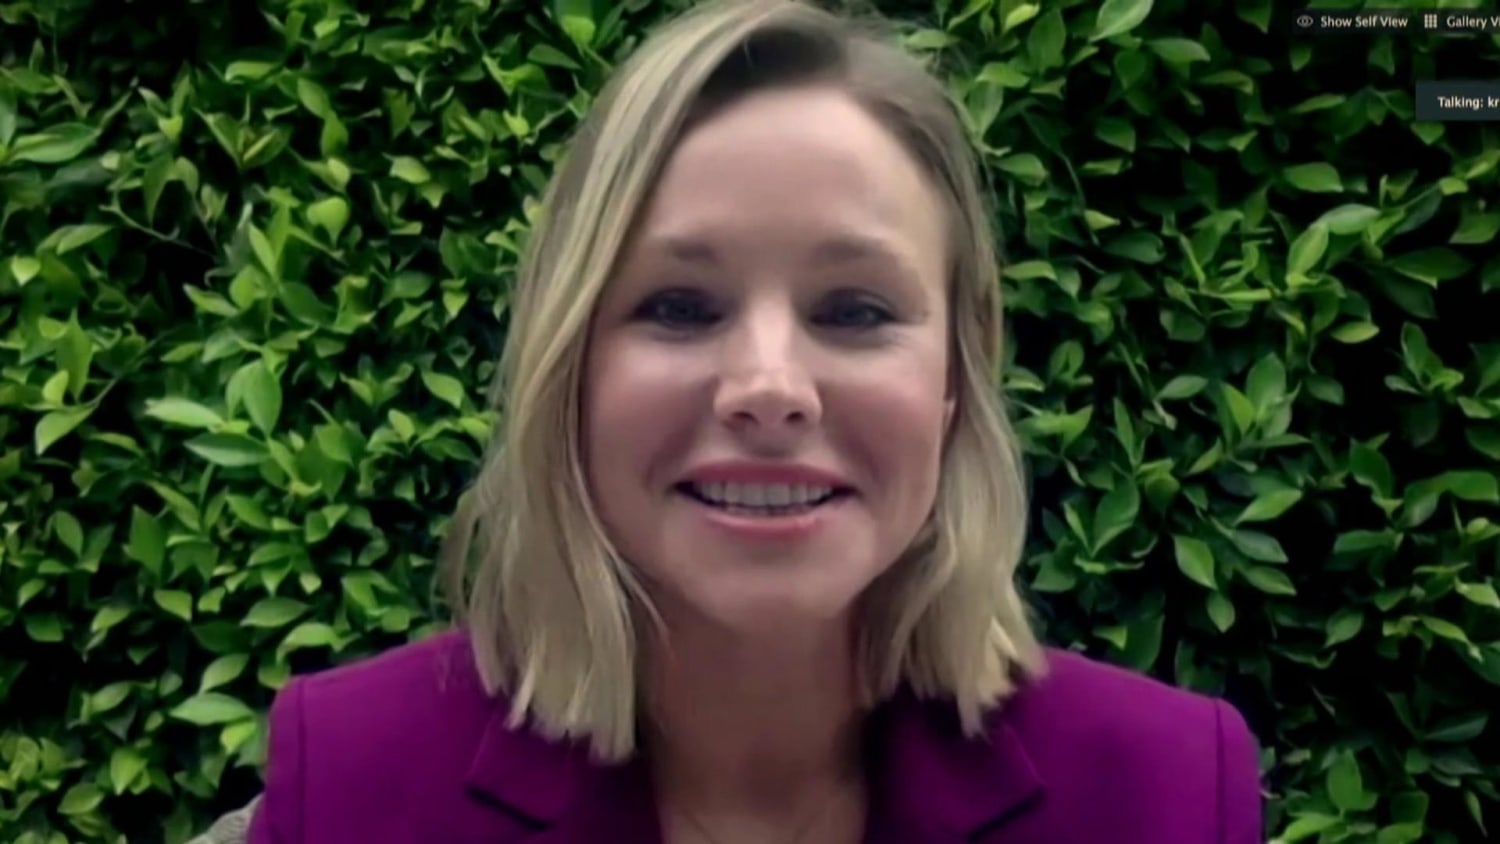 Win $1,000 and a personal message from Kristen Bell - Upworthy